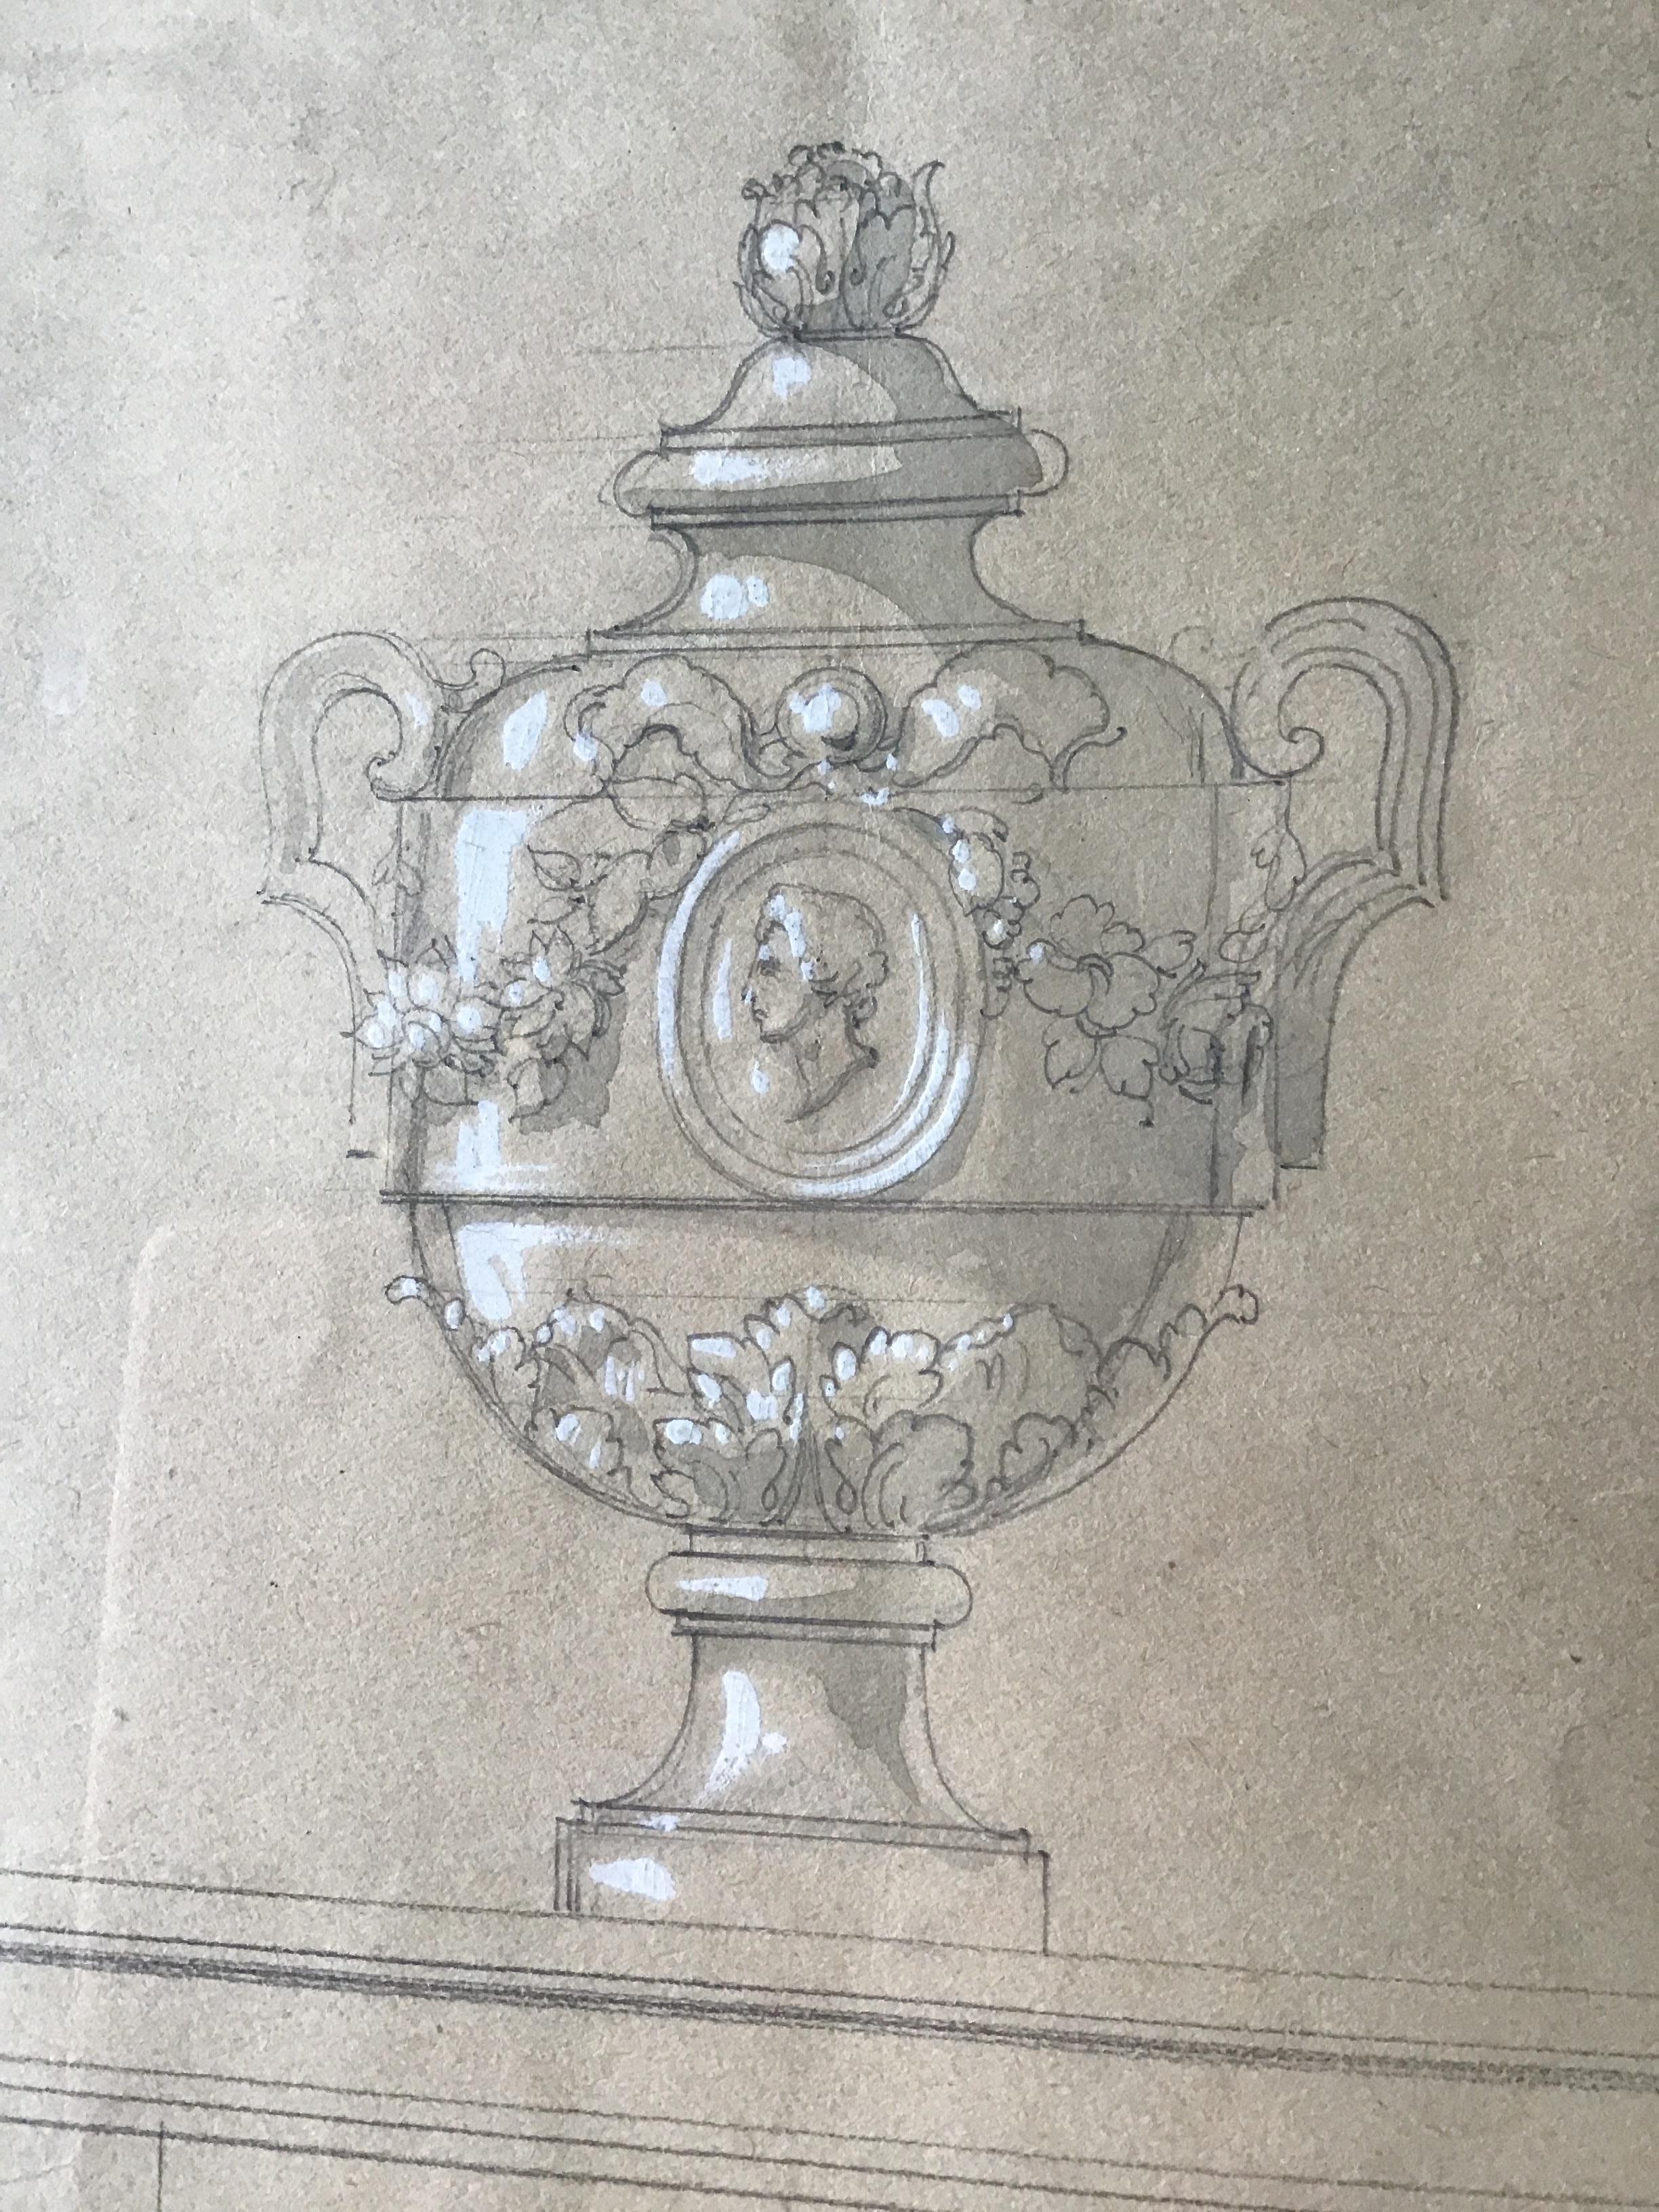 Watercolor of an urn, done in Paris by Jansen in the 1880s.